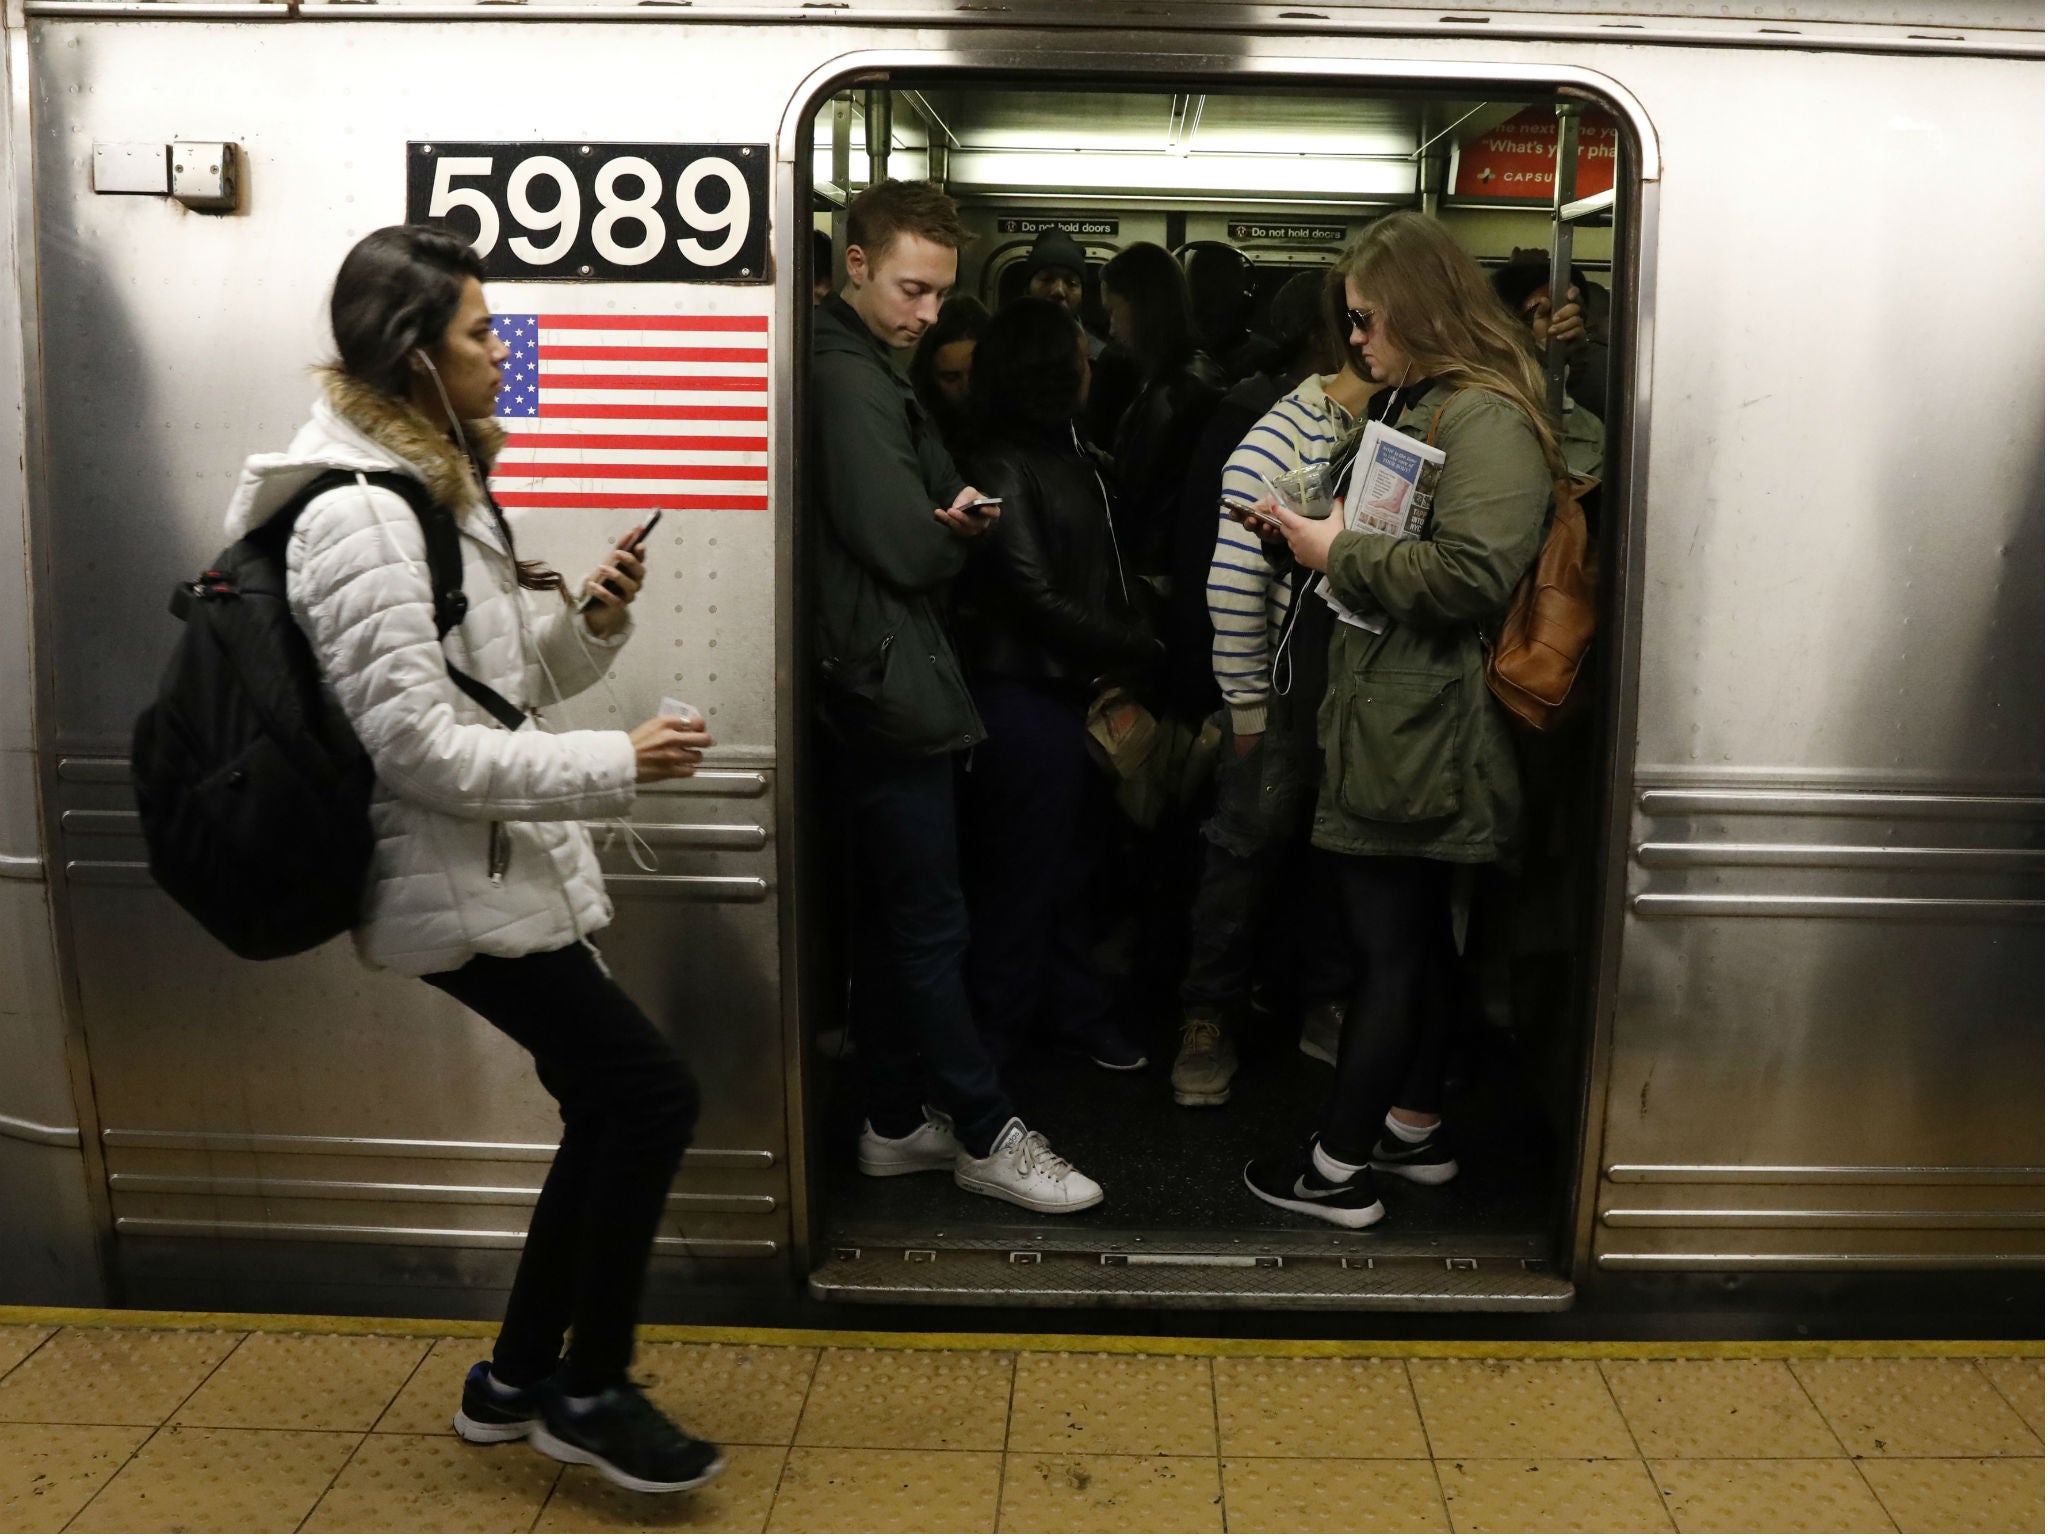 Passengers wait inside a subway train in New York City on April 21, 2017